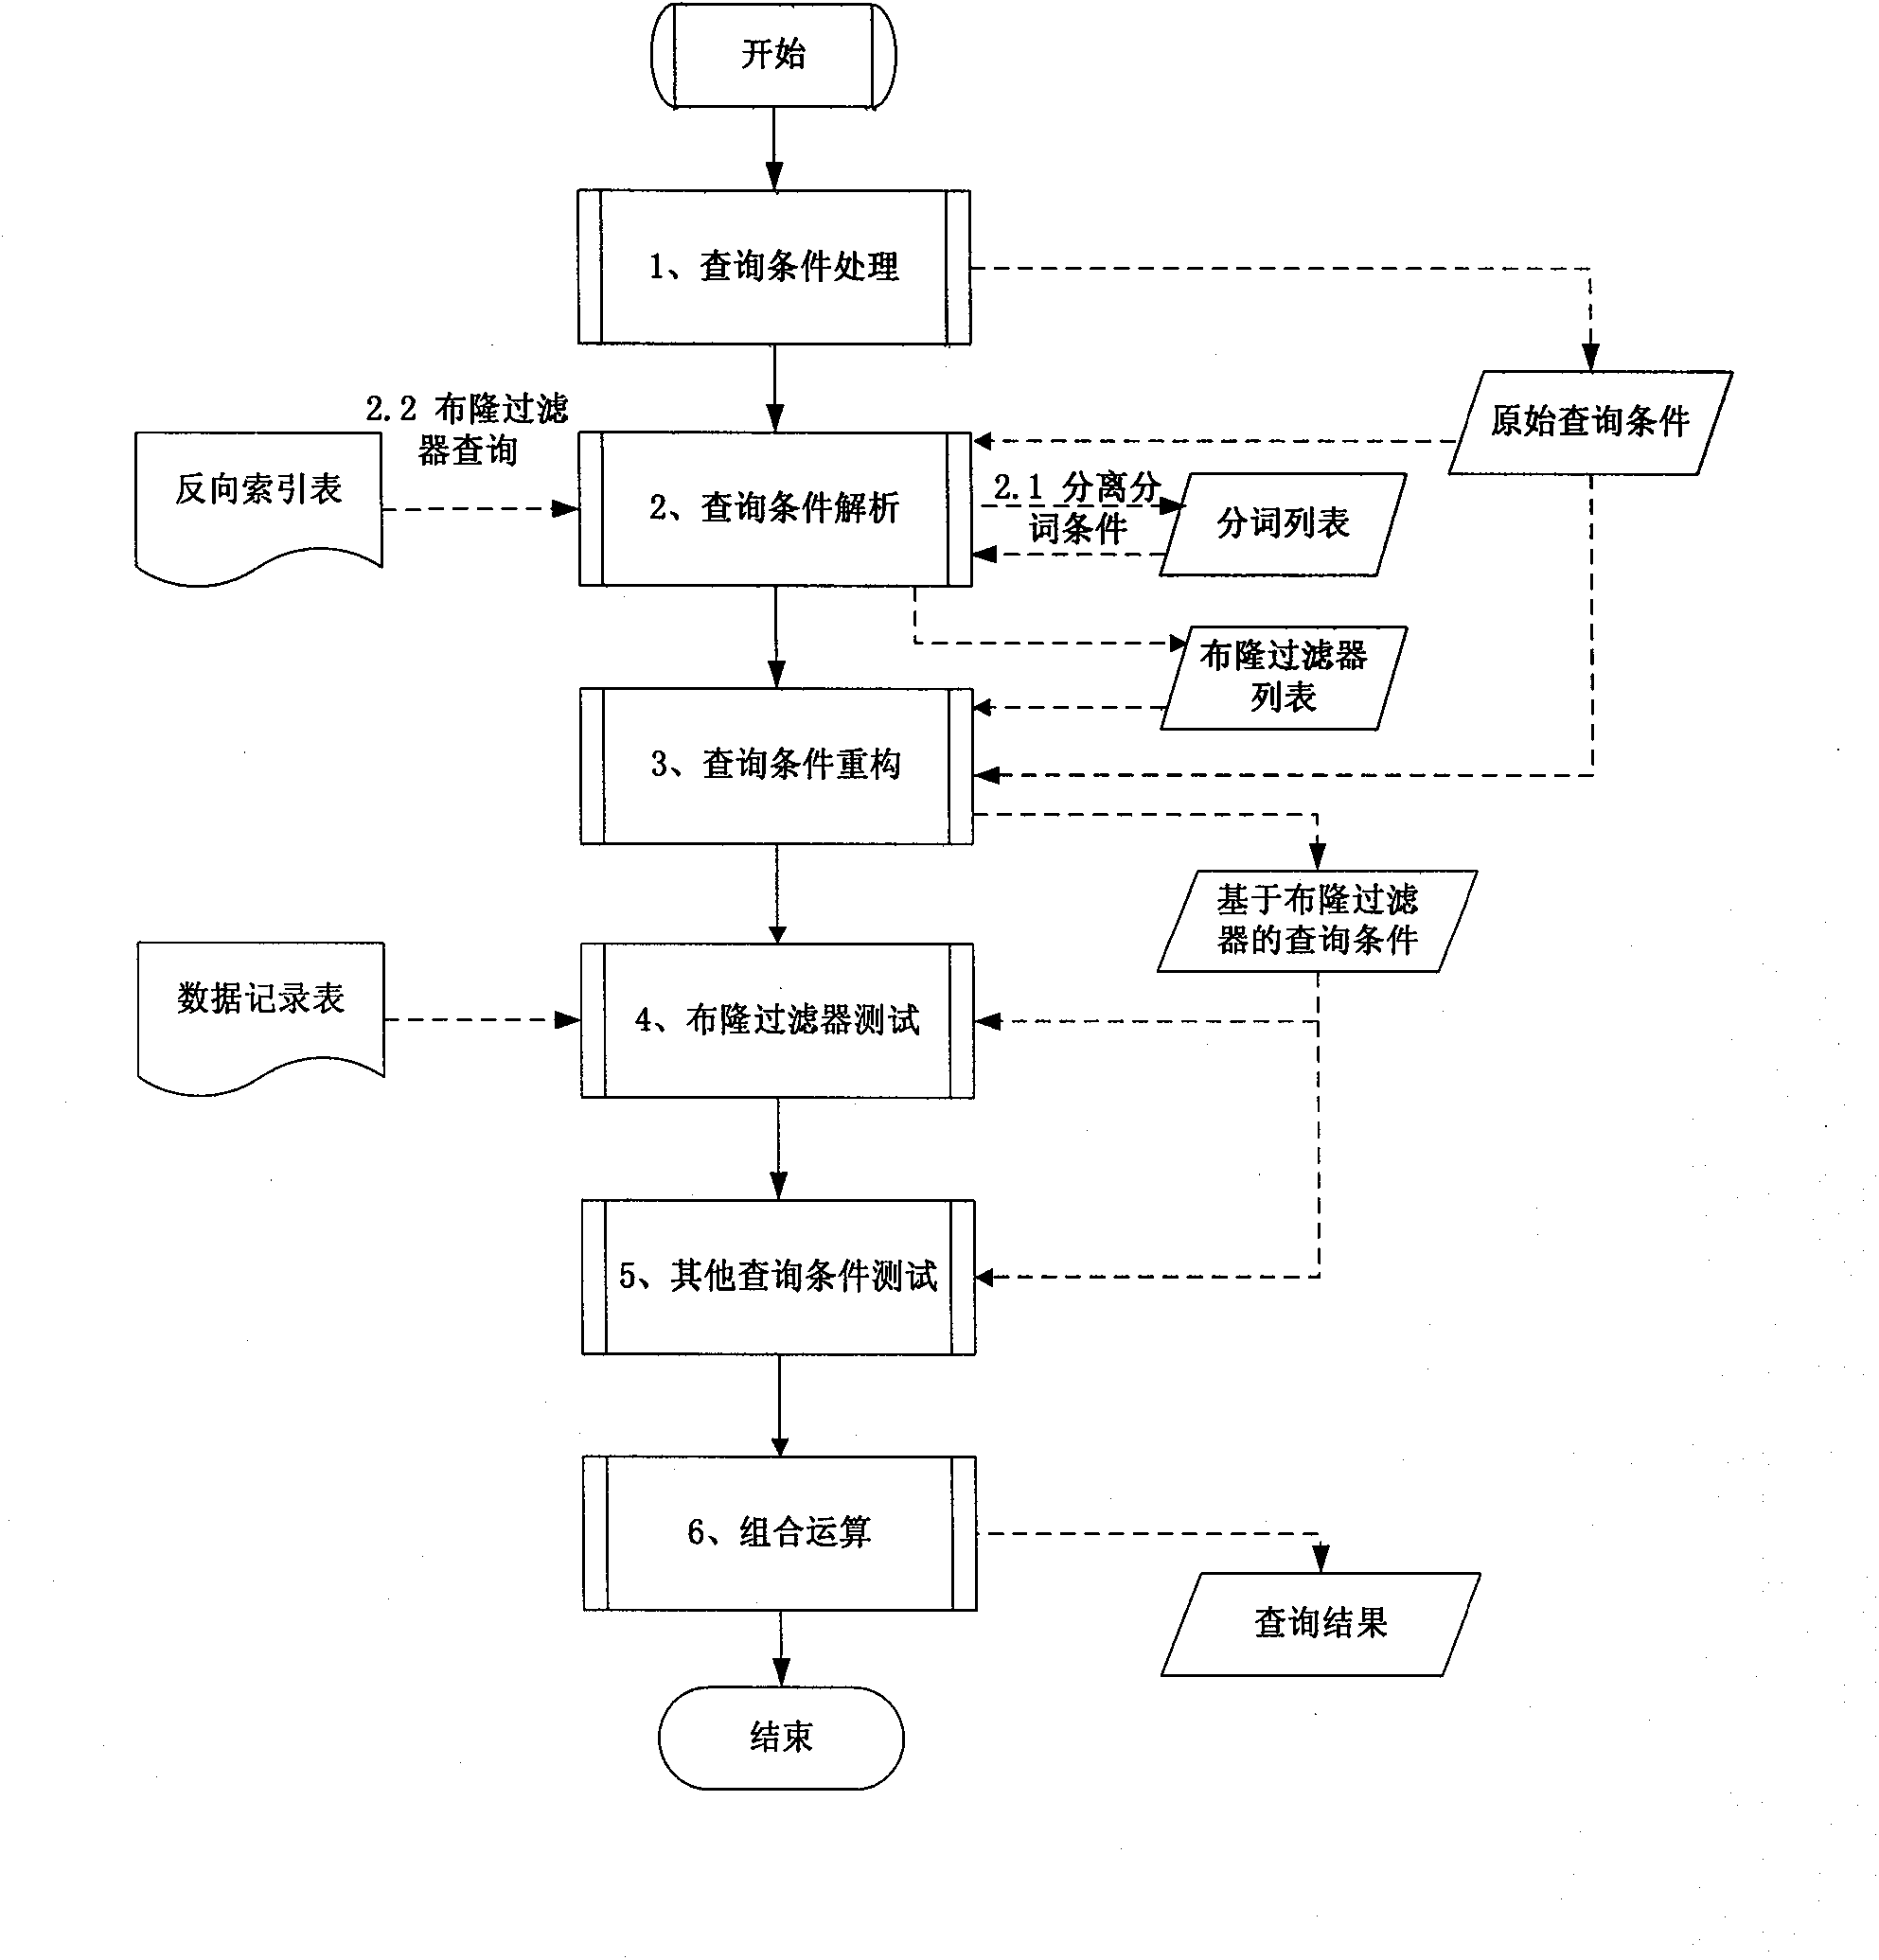 System and method for rapidly searching unstructured data